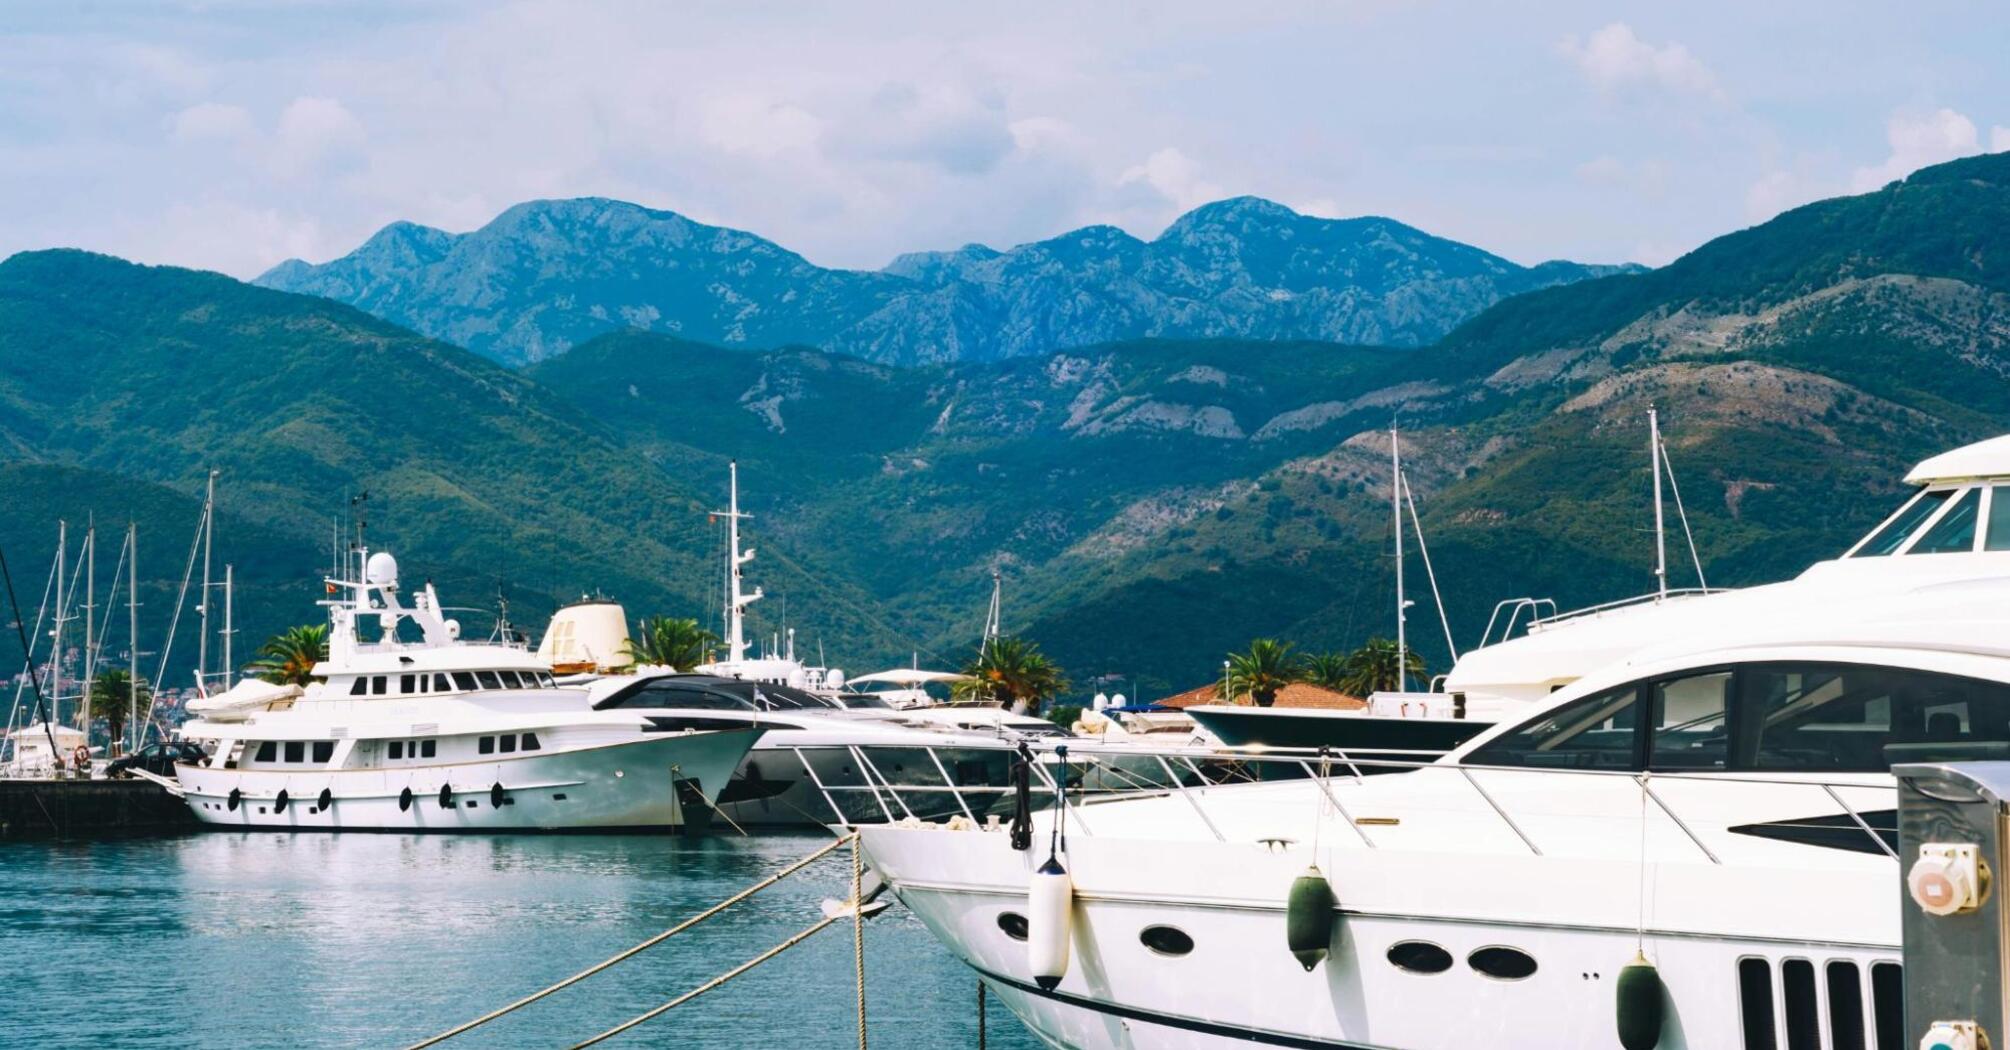 The beautiful scenery observed from Tivat Bay, Montenegro